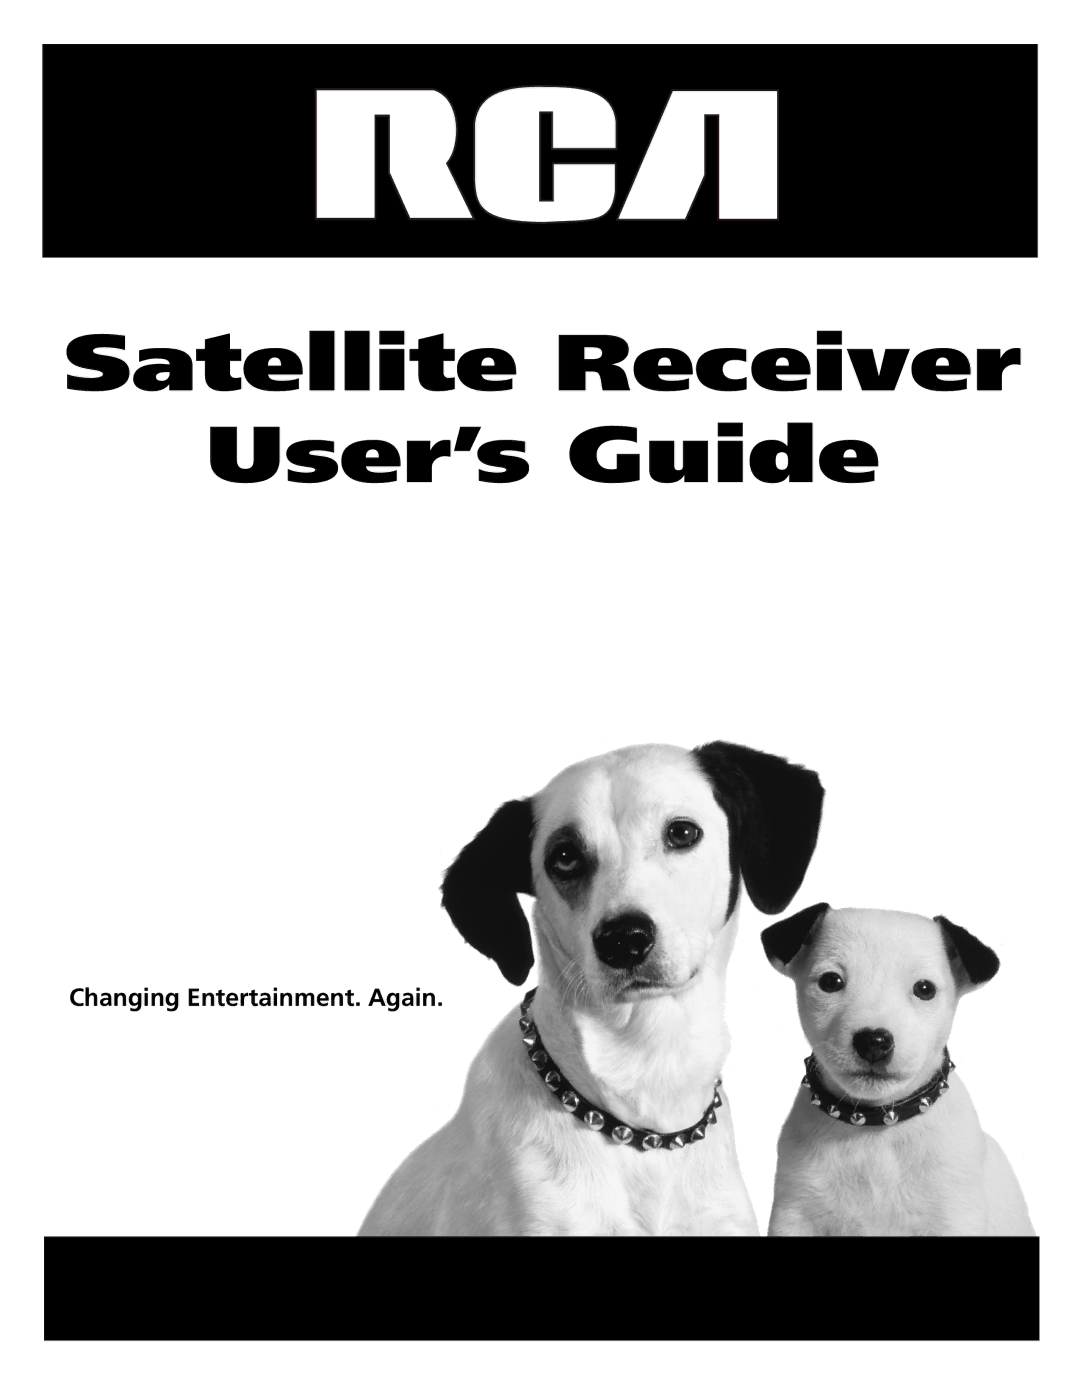 RCA Satellite TV System manual Satellite Receiver User’s Guide, Changing Entertainment. Again 